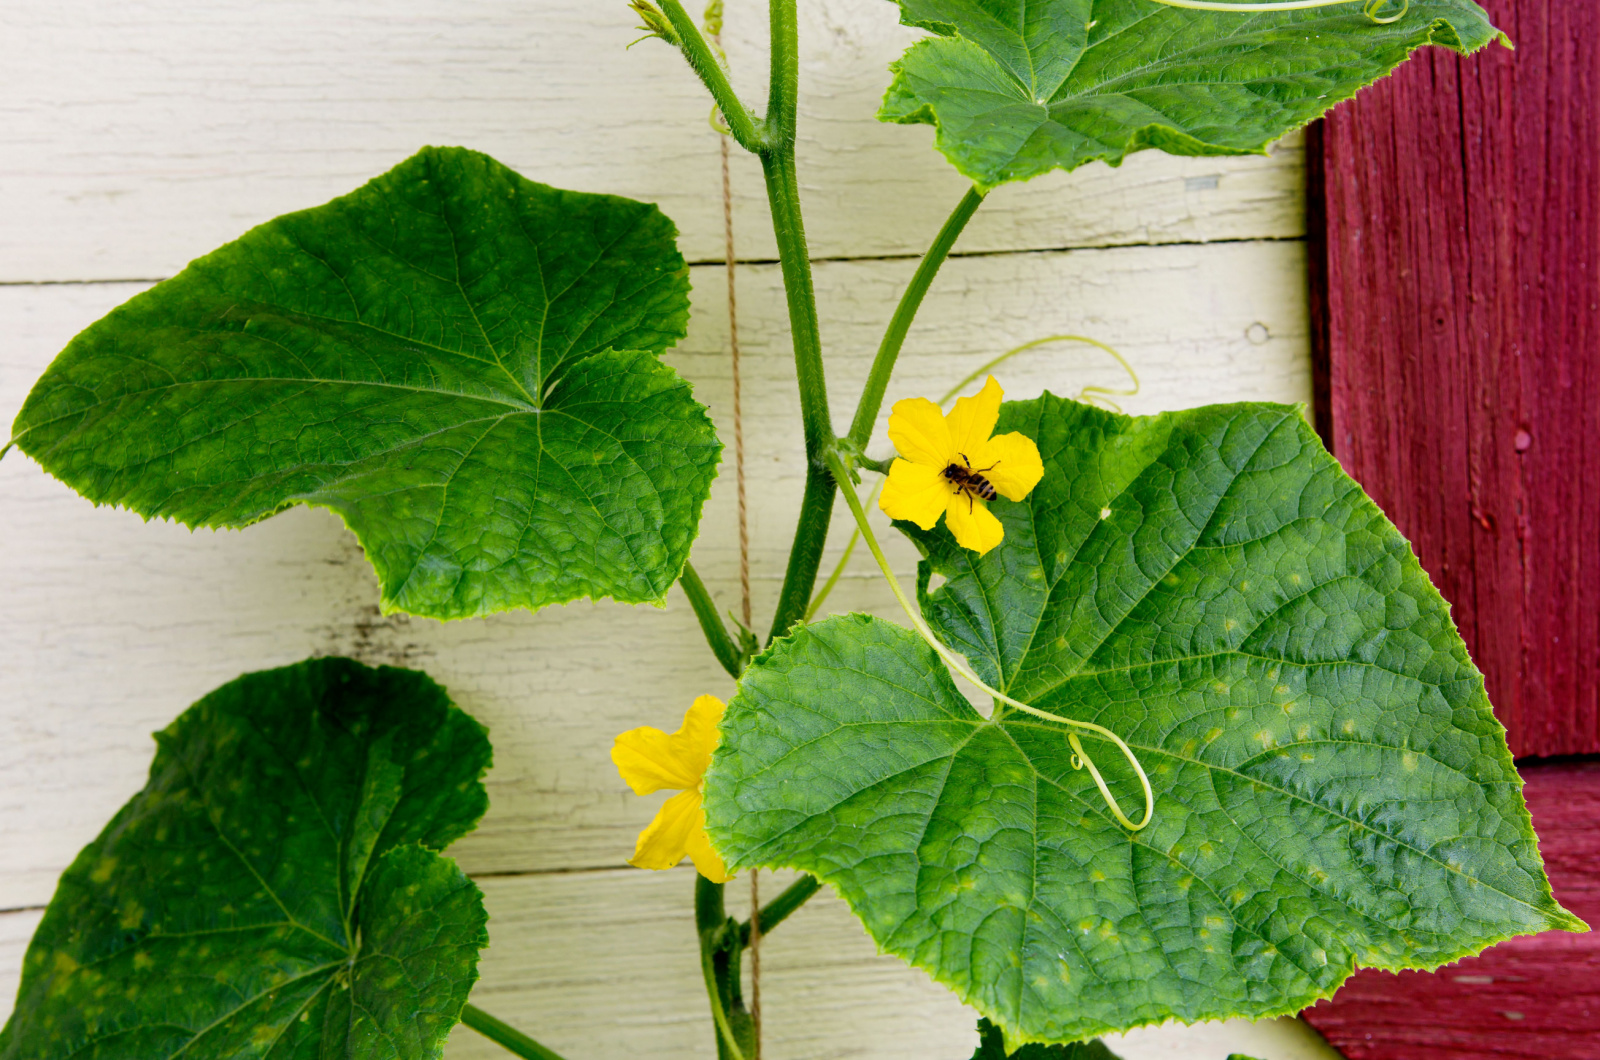 Cucumber branch with a flower